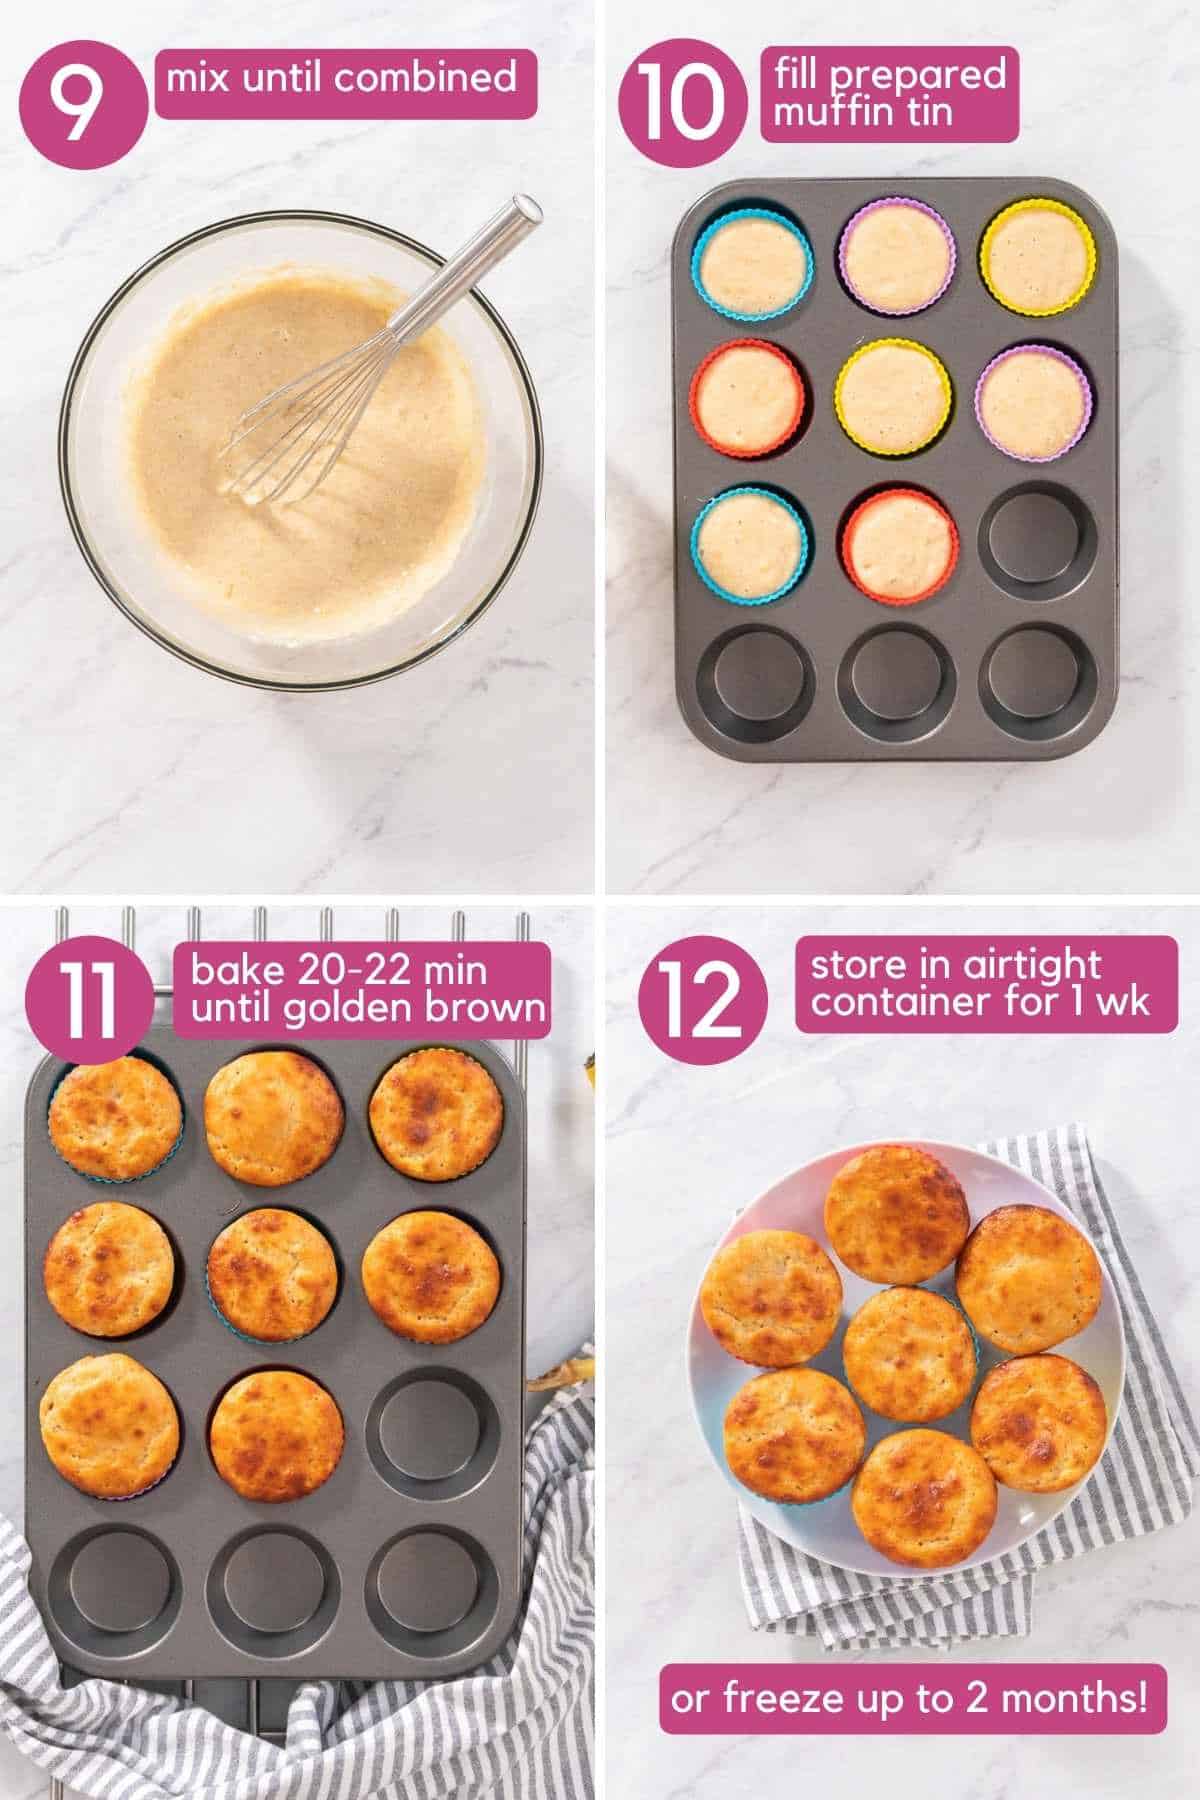 fill muffin tin and bake for banana protein muffins.